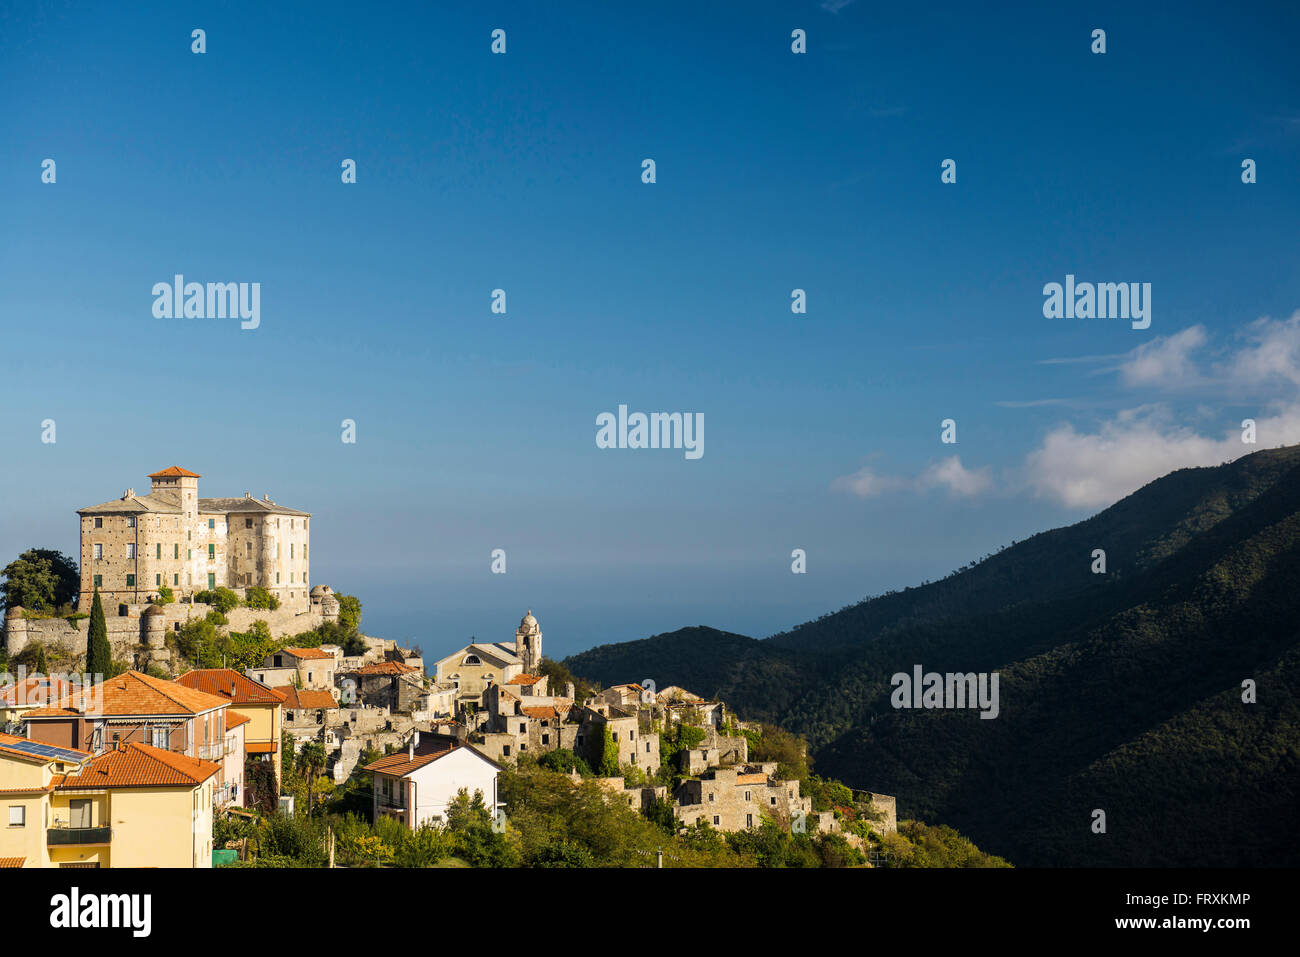 Old town with castle, Balestrino, Province of Savona, Liguria, Italy Stock Photo